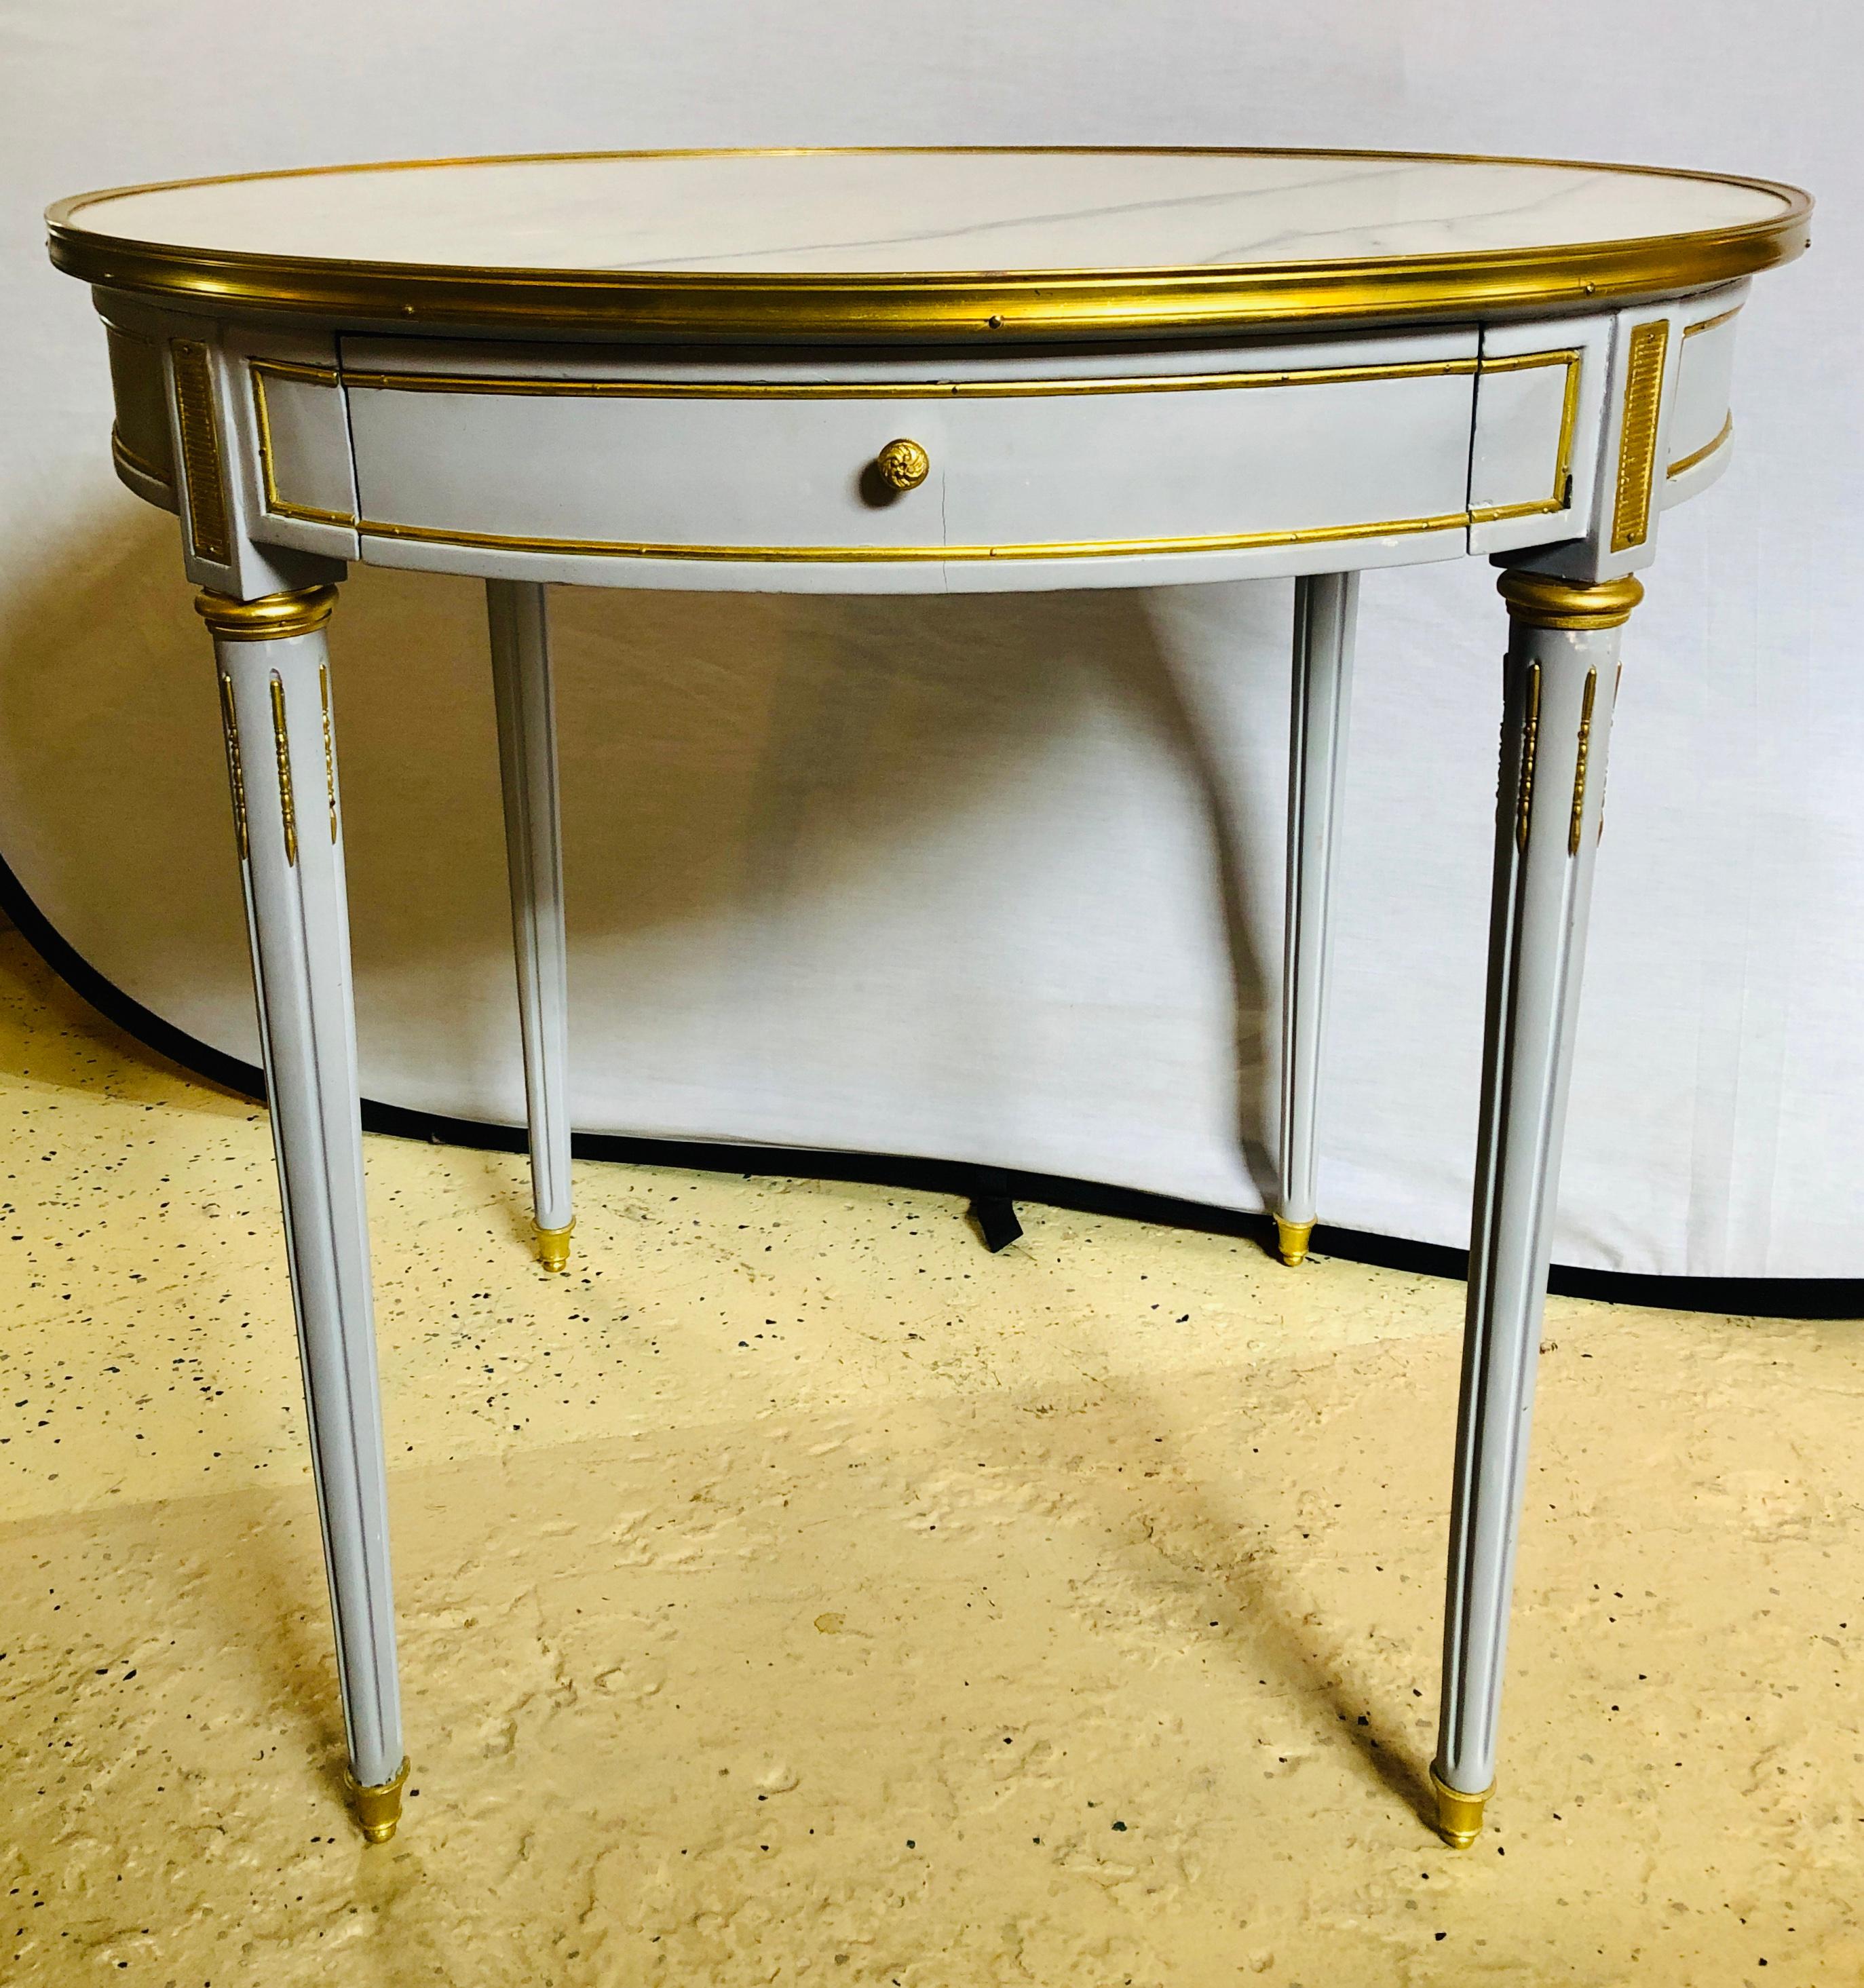 Pair Large Hollywood Regency painted bronze mounted Bouiliotte, end or center tables. A fine blu green color shines on these finely crafted single drawer end or center tables. The Louis XVI style form having bronze sabots leading to tapering legs